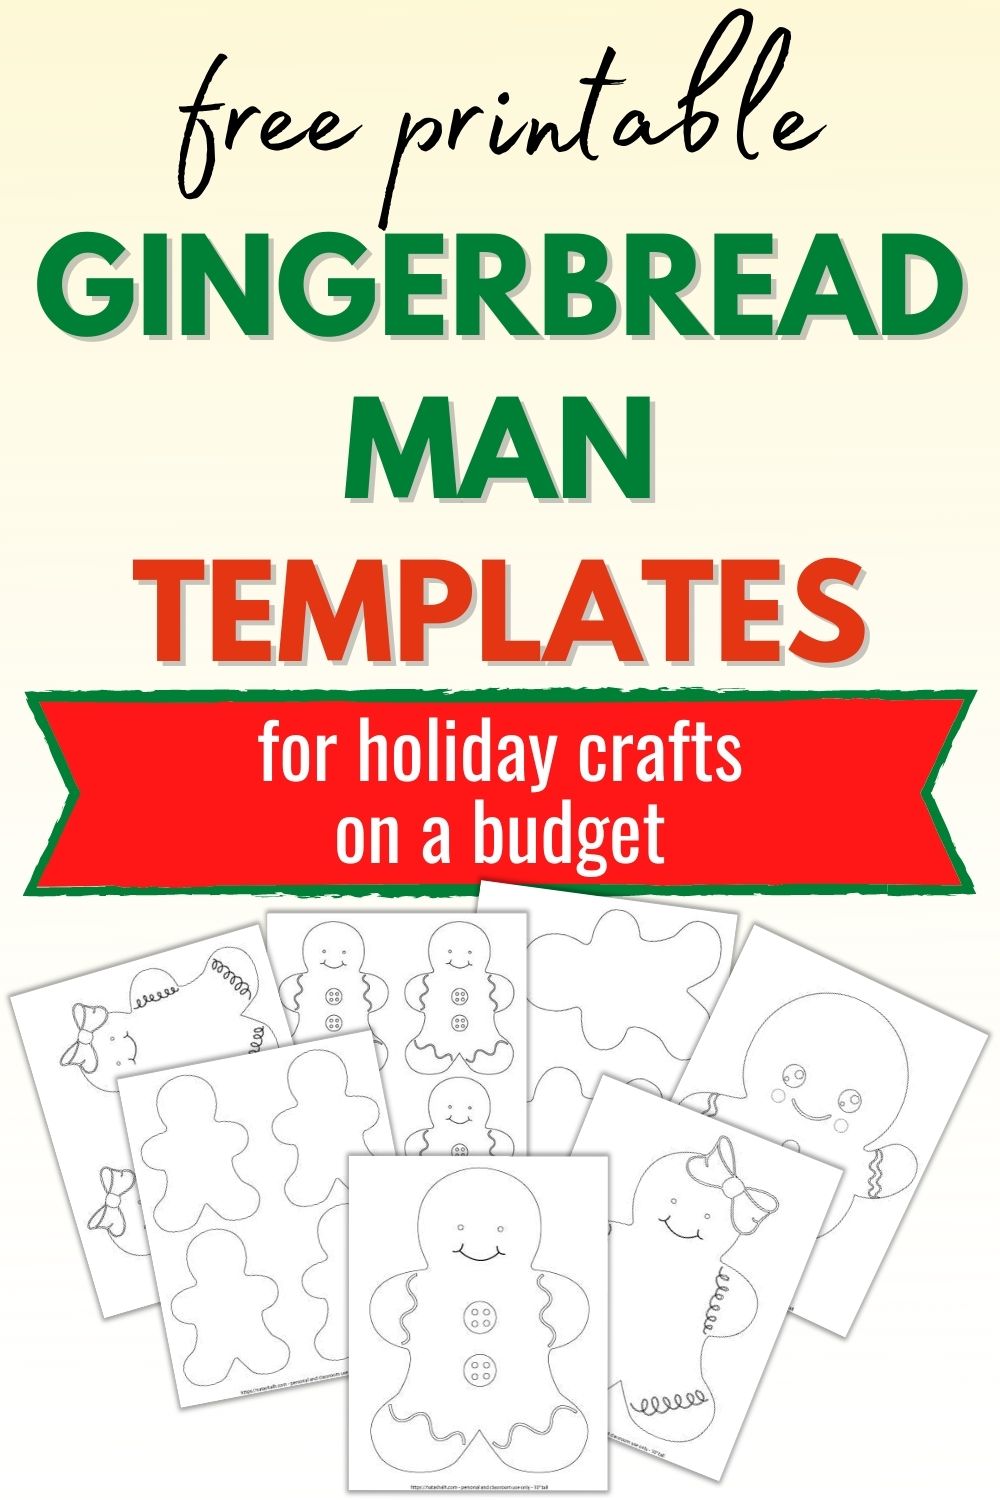 11 Free Printable Gingerbread Man Templates (great for kid's holiday